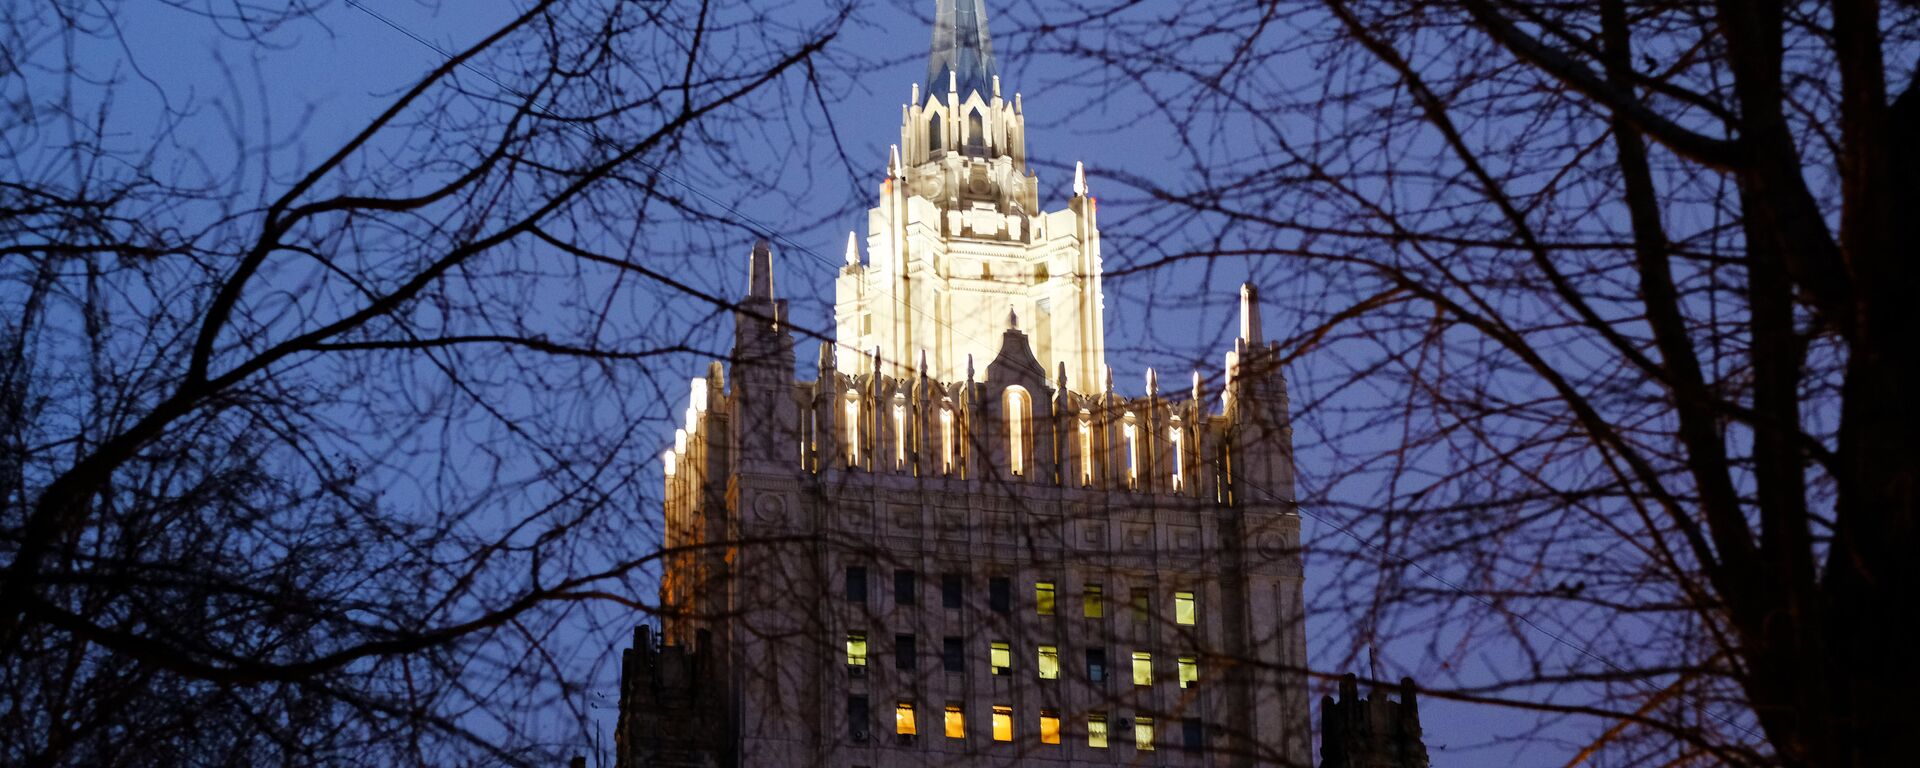 The Russian Foreign Ministry building. - Sputnik International, 1920, 10.04.2021